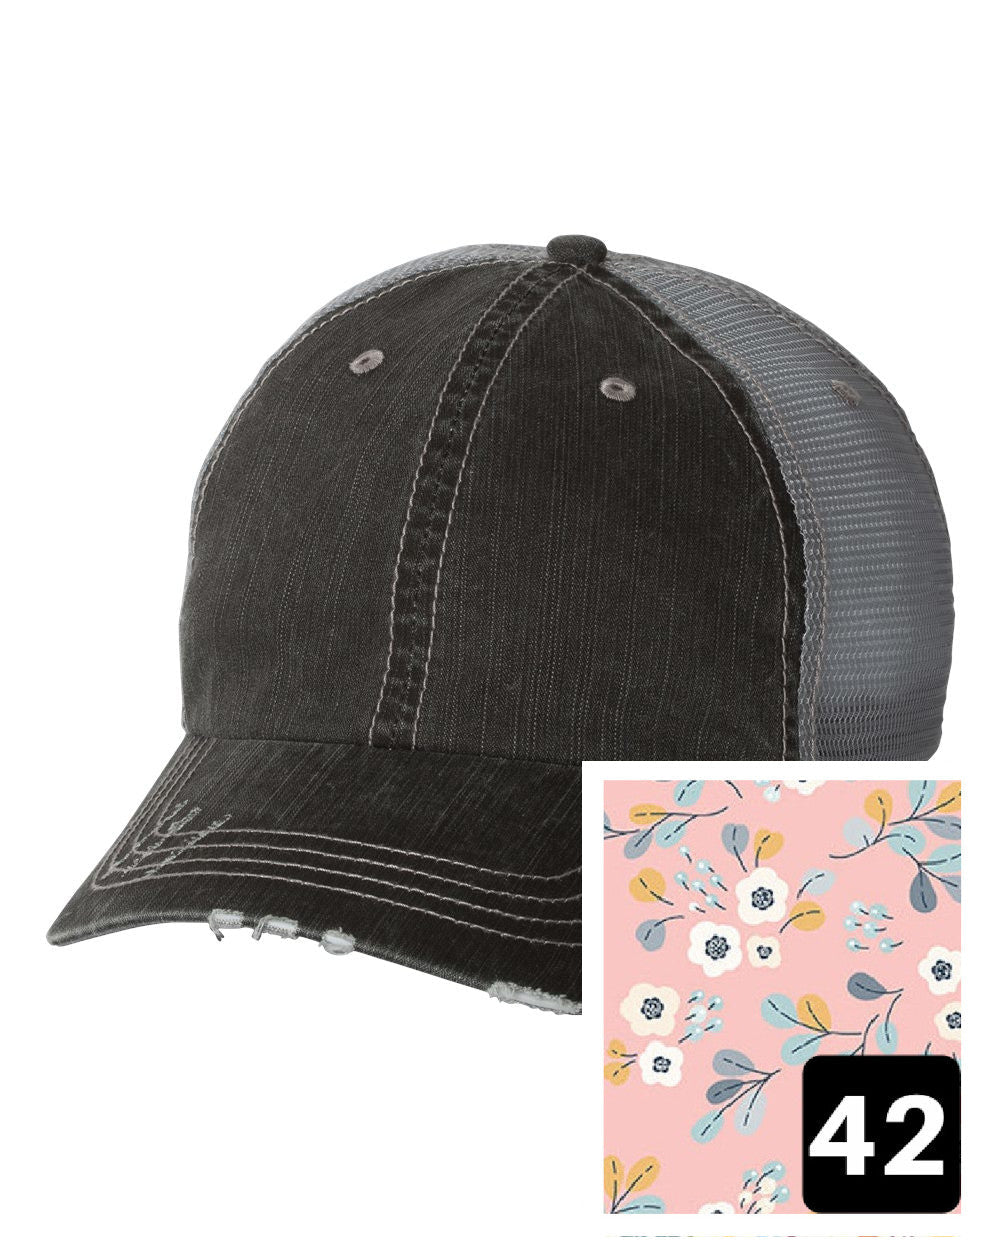 gray distressed trucker hat with light blue and pink mosaic fabric state of Georgia